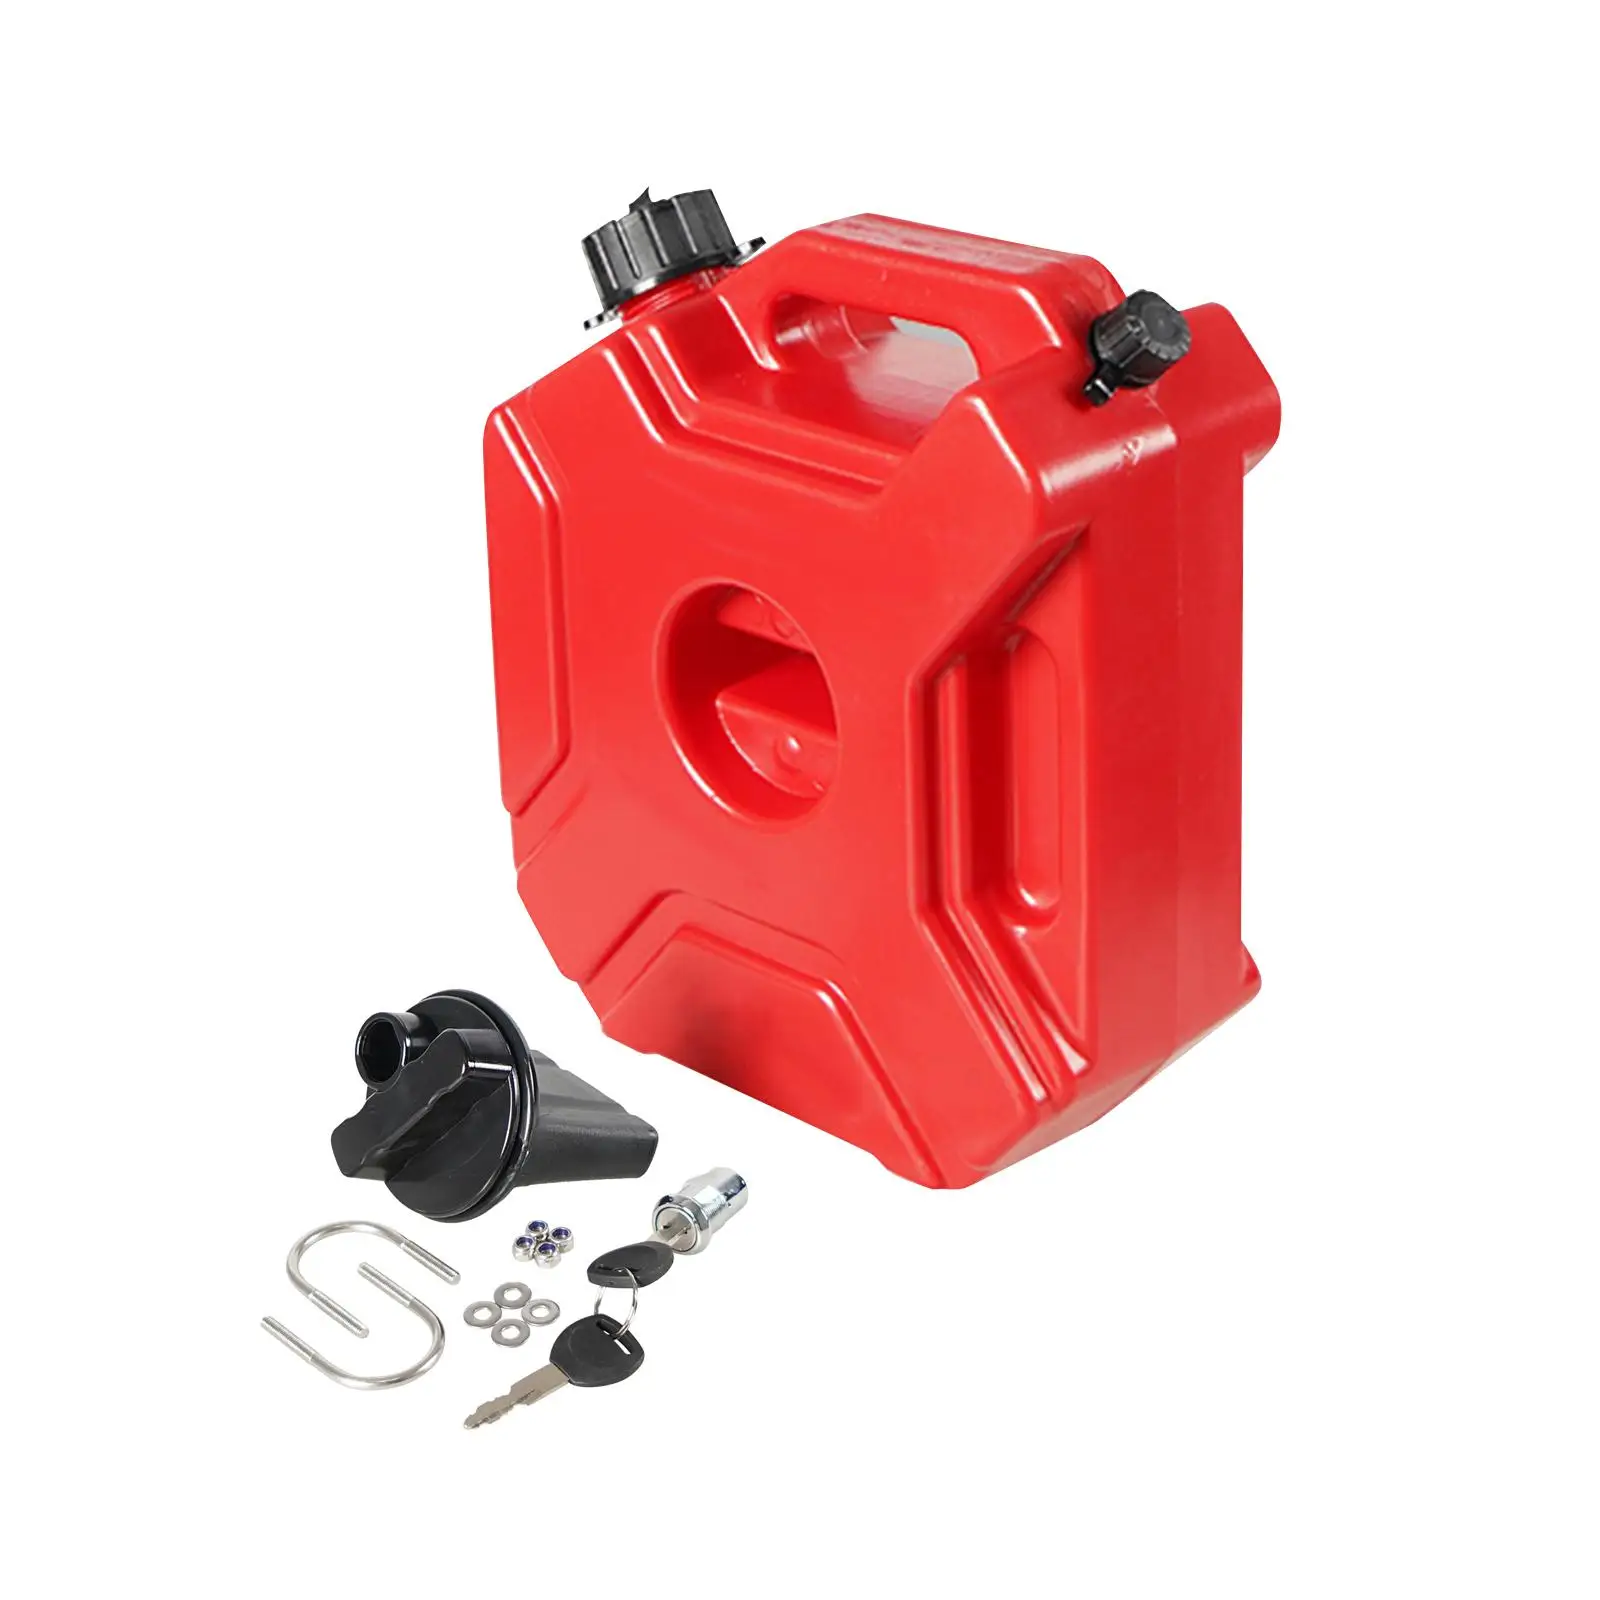 Petrol Tanks 5L Durable Plastic with Lock and Keys Easily Install Spare Tank for Car Travel SUV Automotive Moto Accessories